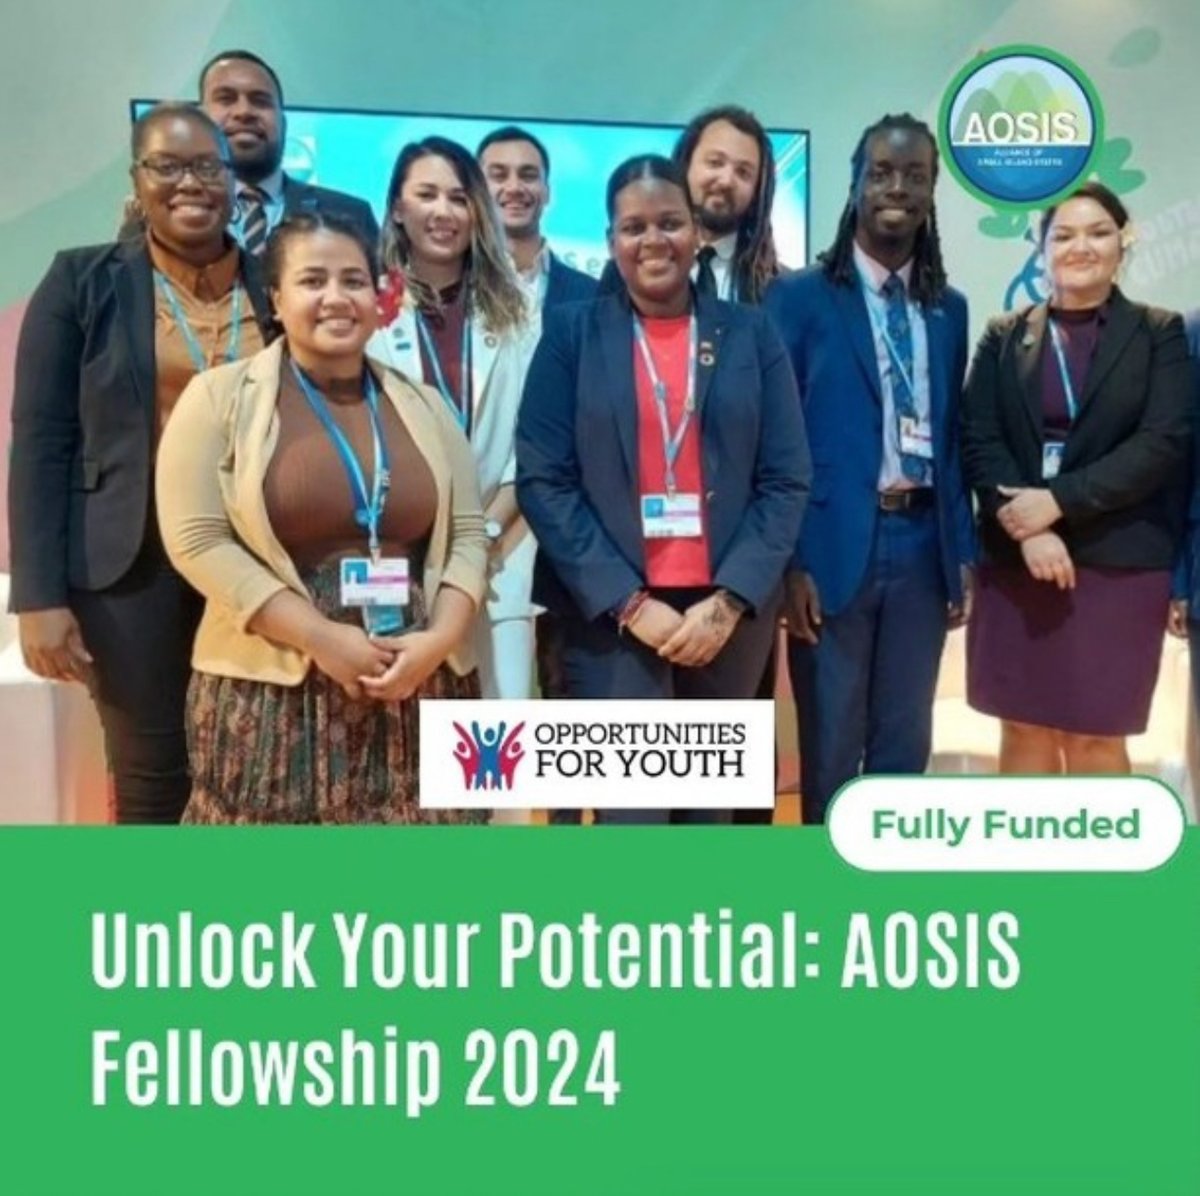 🌍 AOSIS Fellowship Program 🌊 Calling young professionals from AOSIS countries! Dive into climate change, oceans, and sustainable development. 🚀

Apply by Dec 8, 2023. 

📆 Apply Here: bit.ly/49LgRin

#AOSISFellowship #ClimateAction #ApplyNow #opportunity